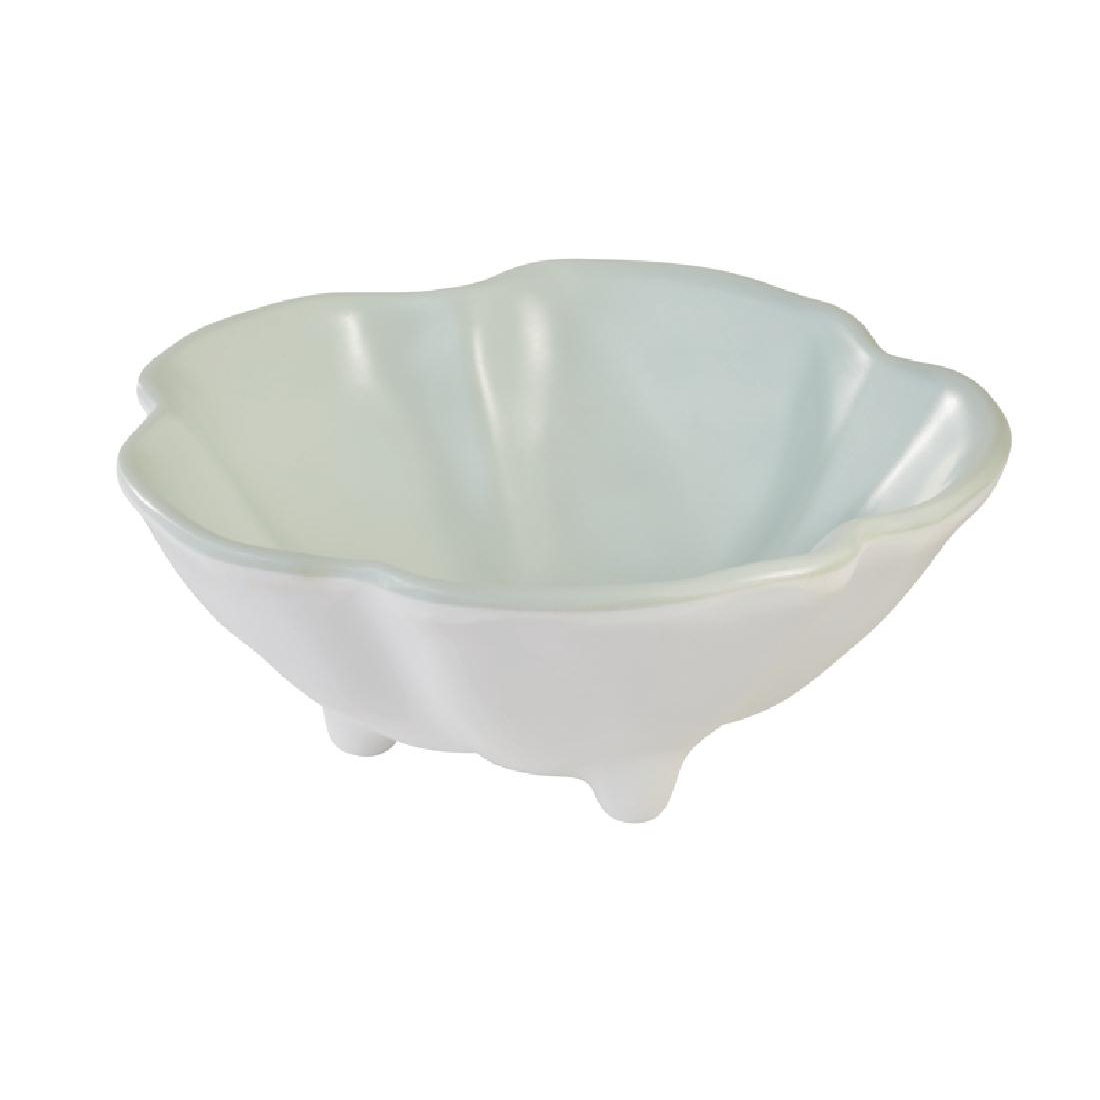 APS Fullies Footed Bowl Mint 50ml